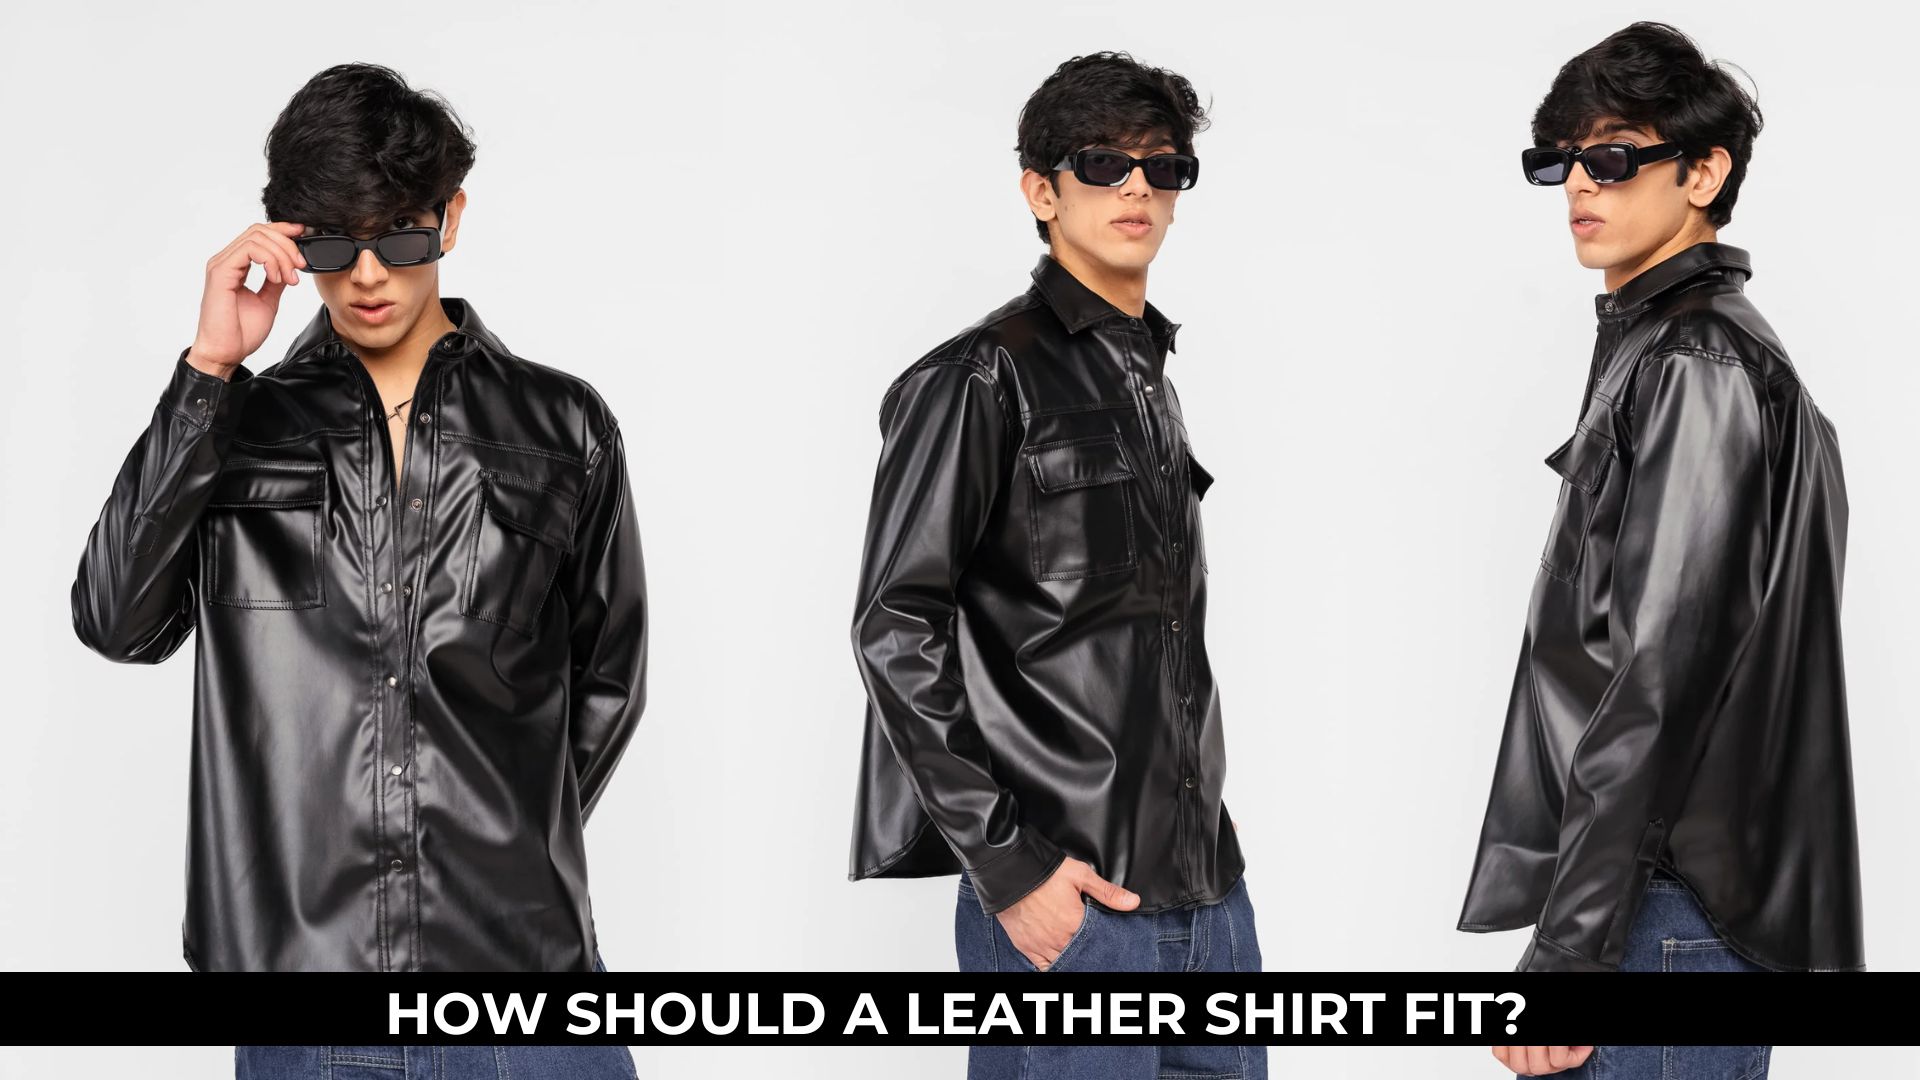 How Should a Leather Shirt Fit